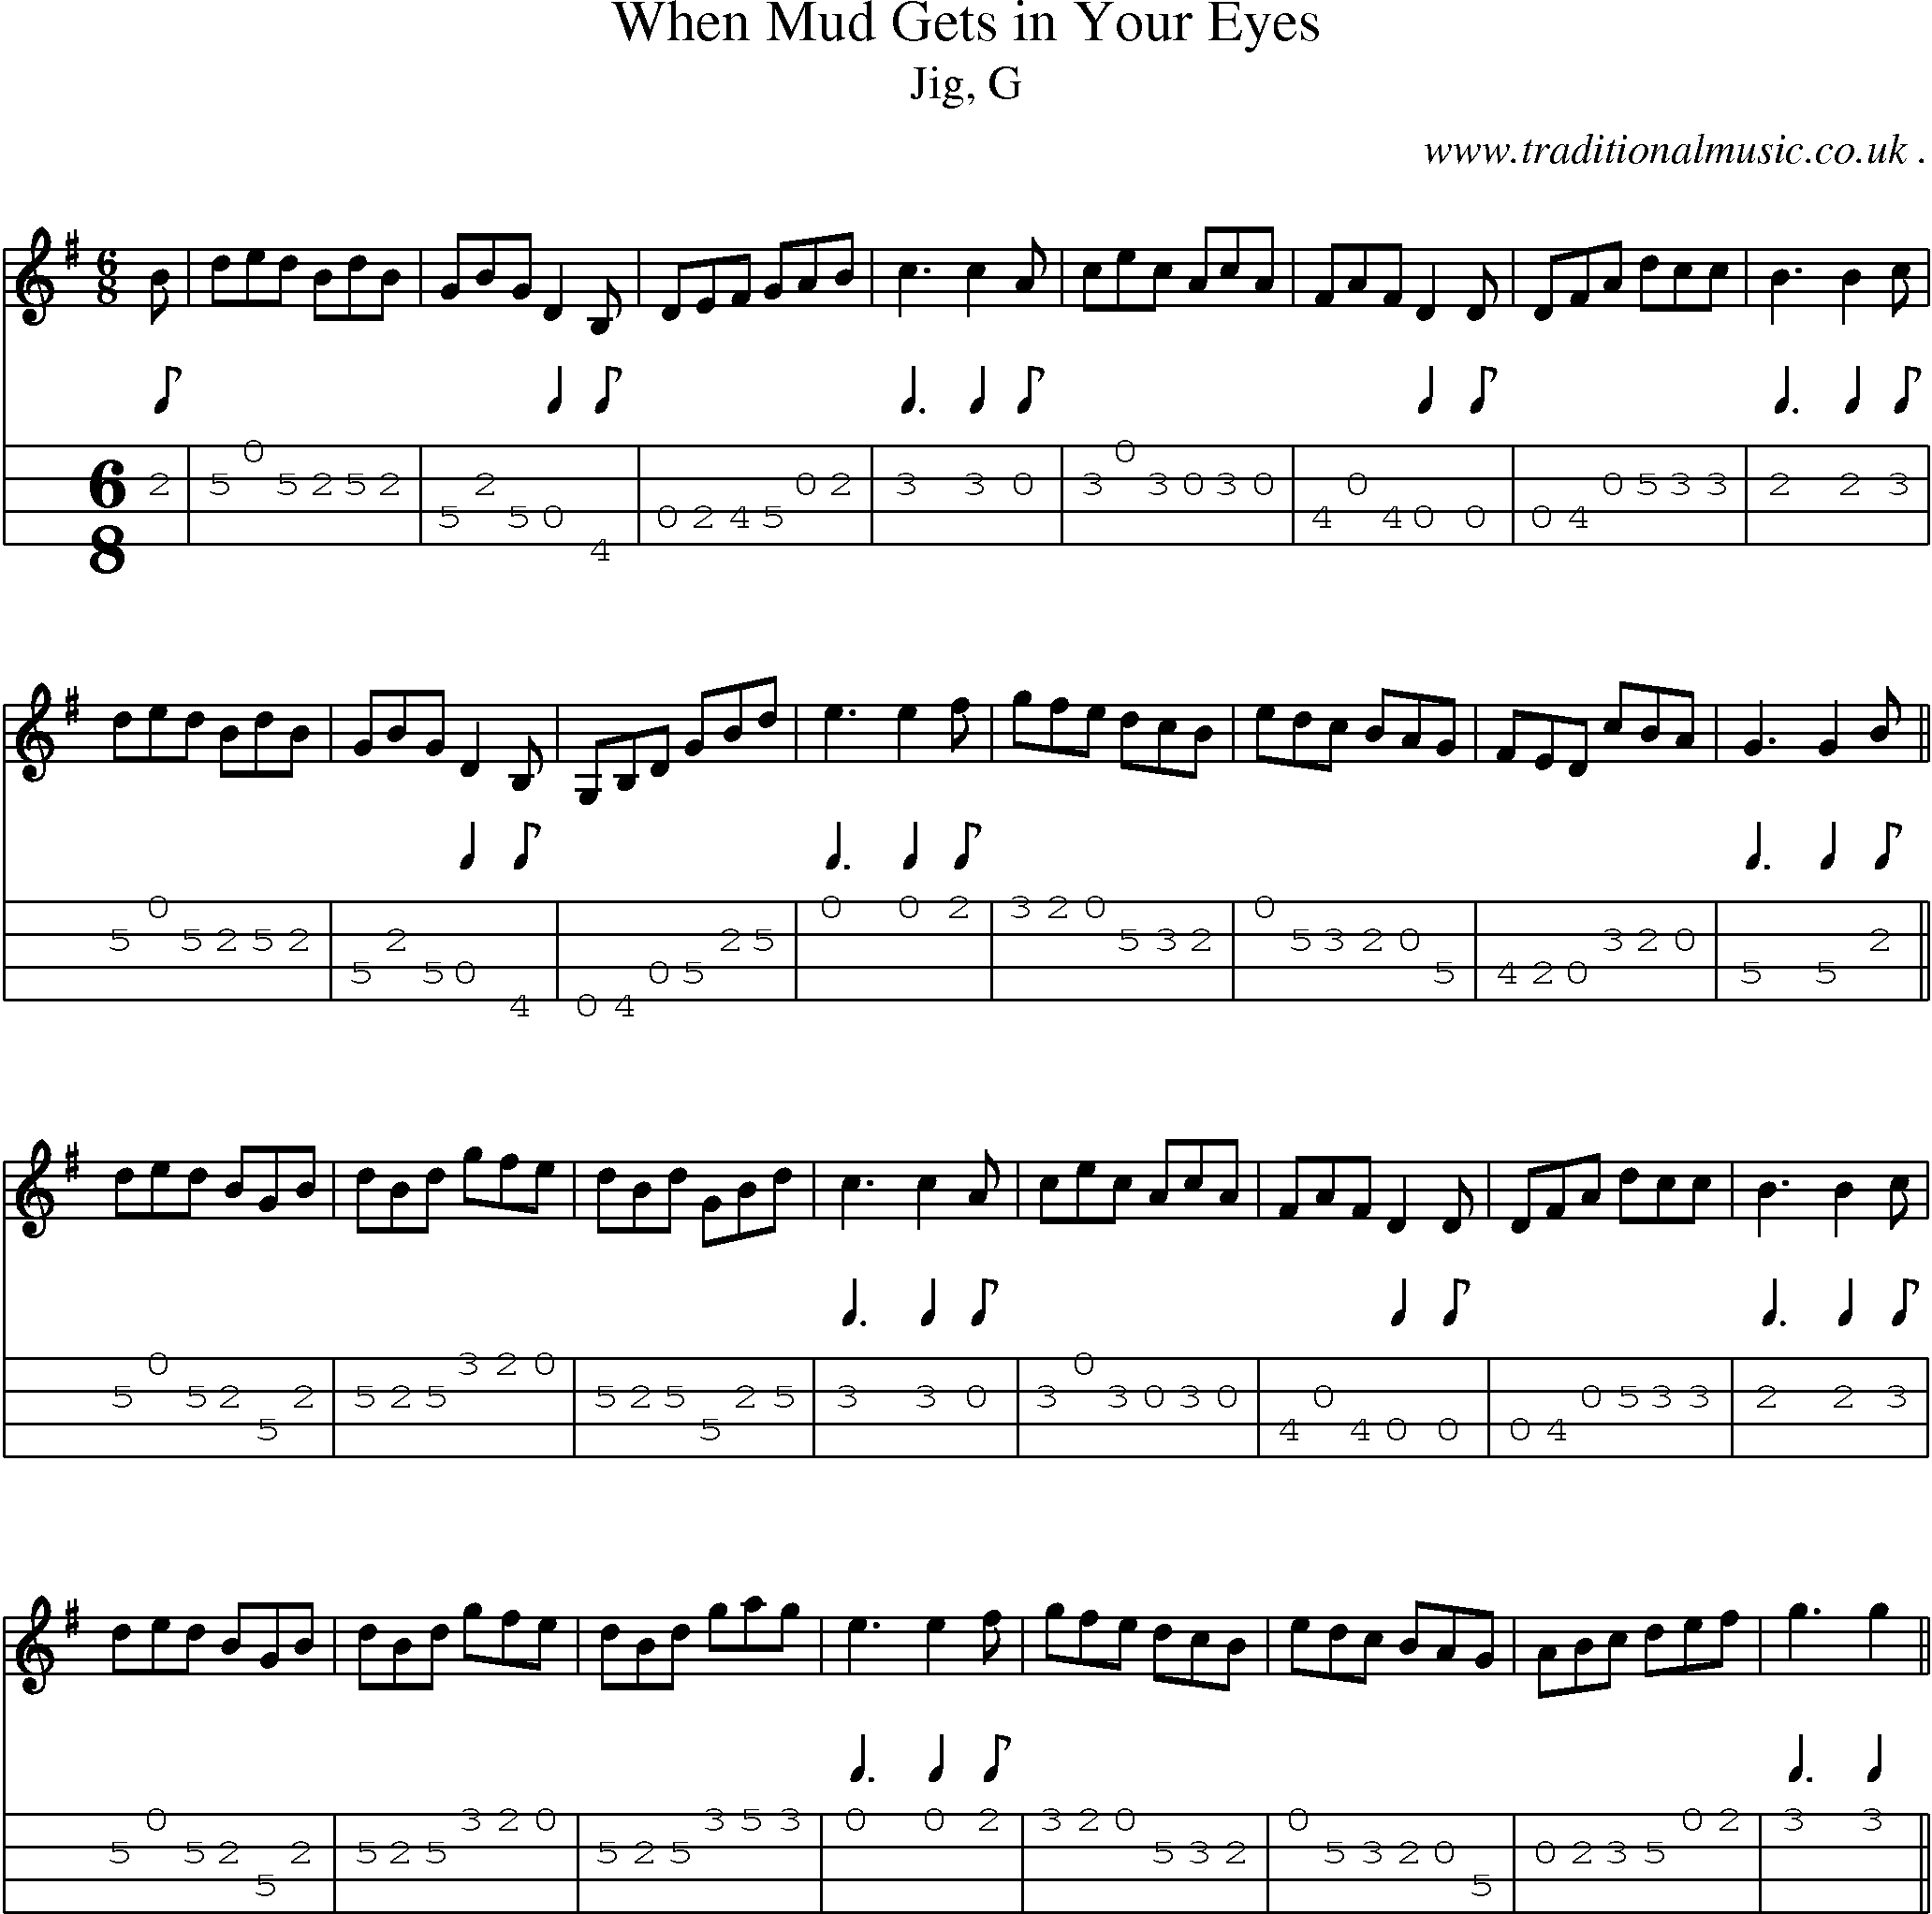 Sheet-music  score, Chords and Mandolin Tabs for When Mud Gets In Your Eyes